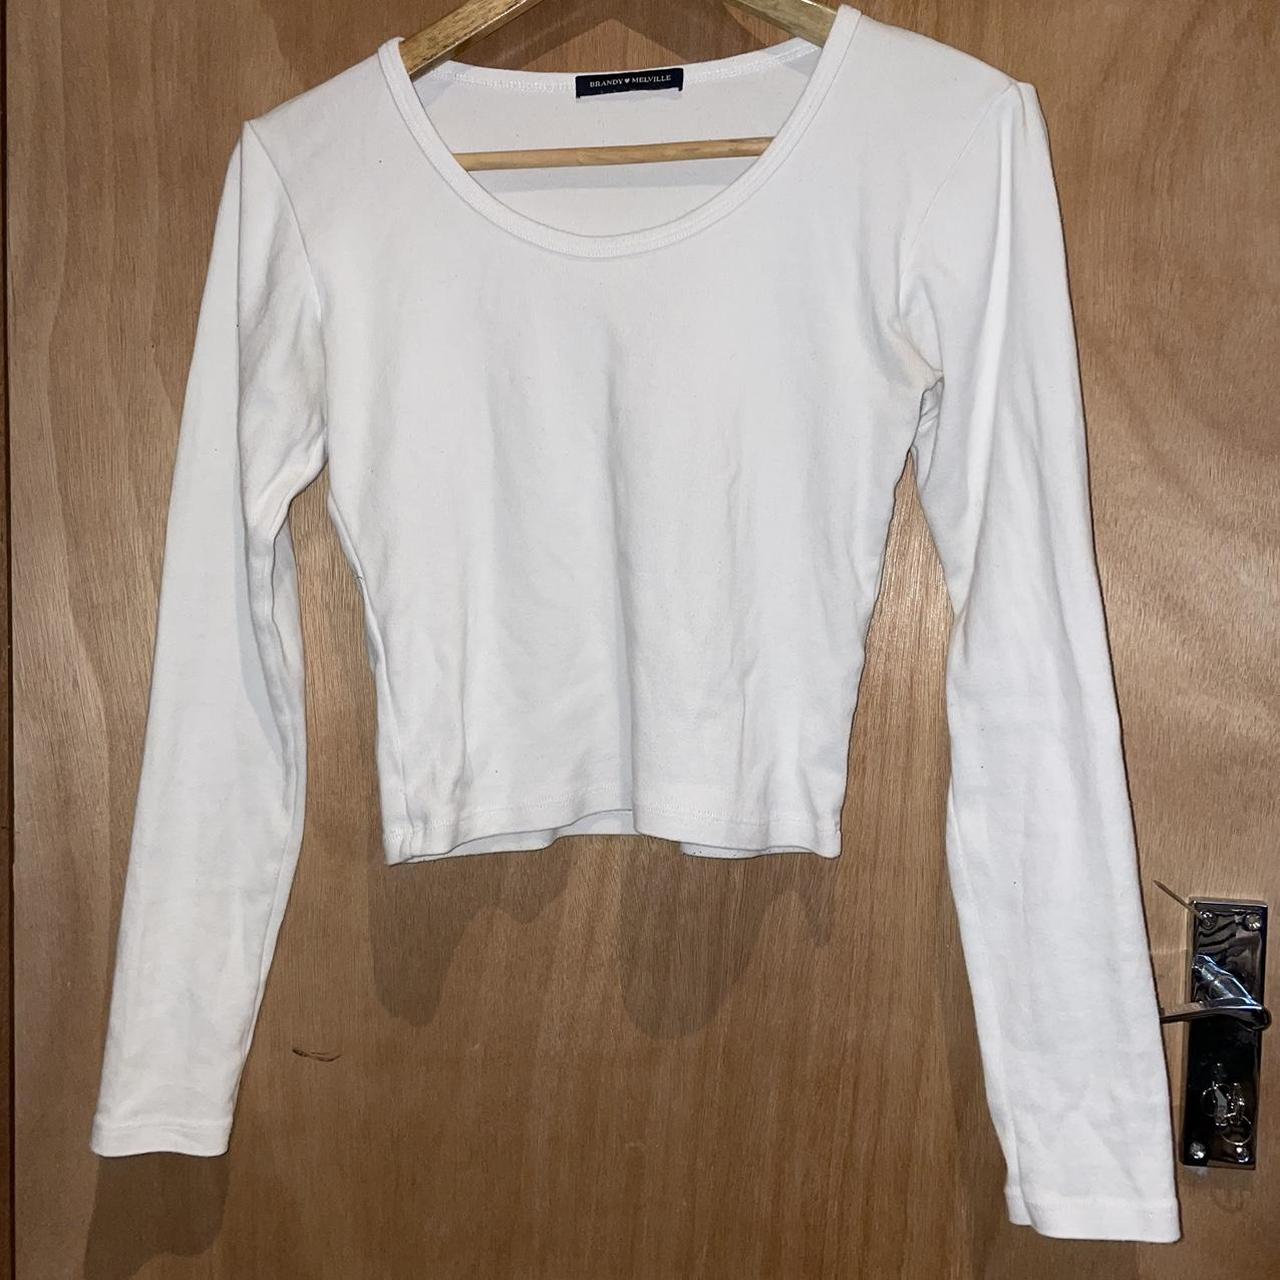 Brandy Melville white long sleeve top, best fit up